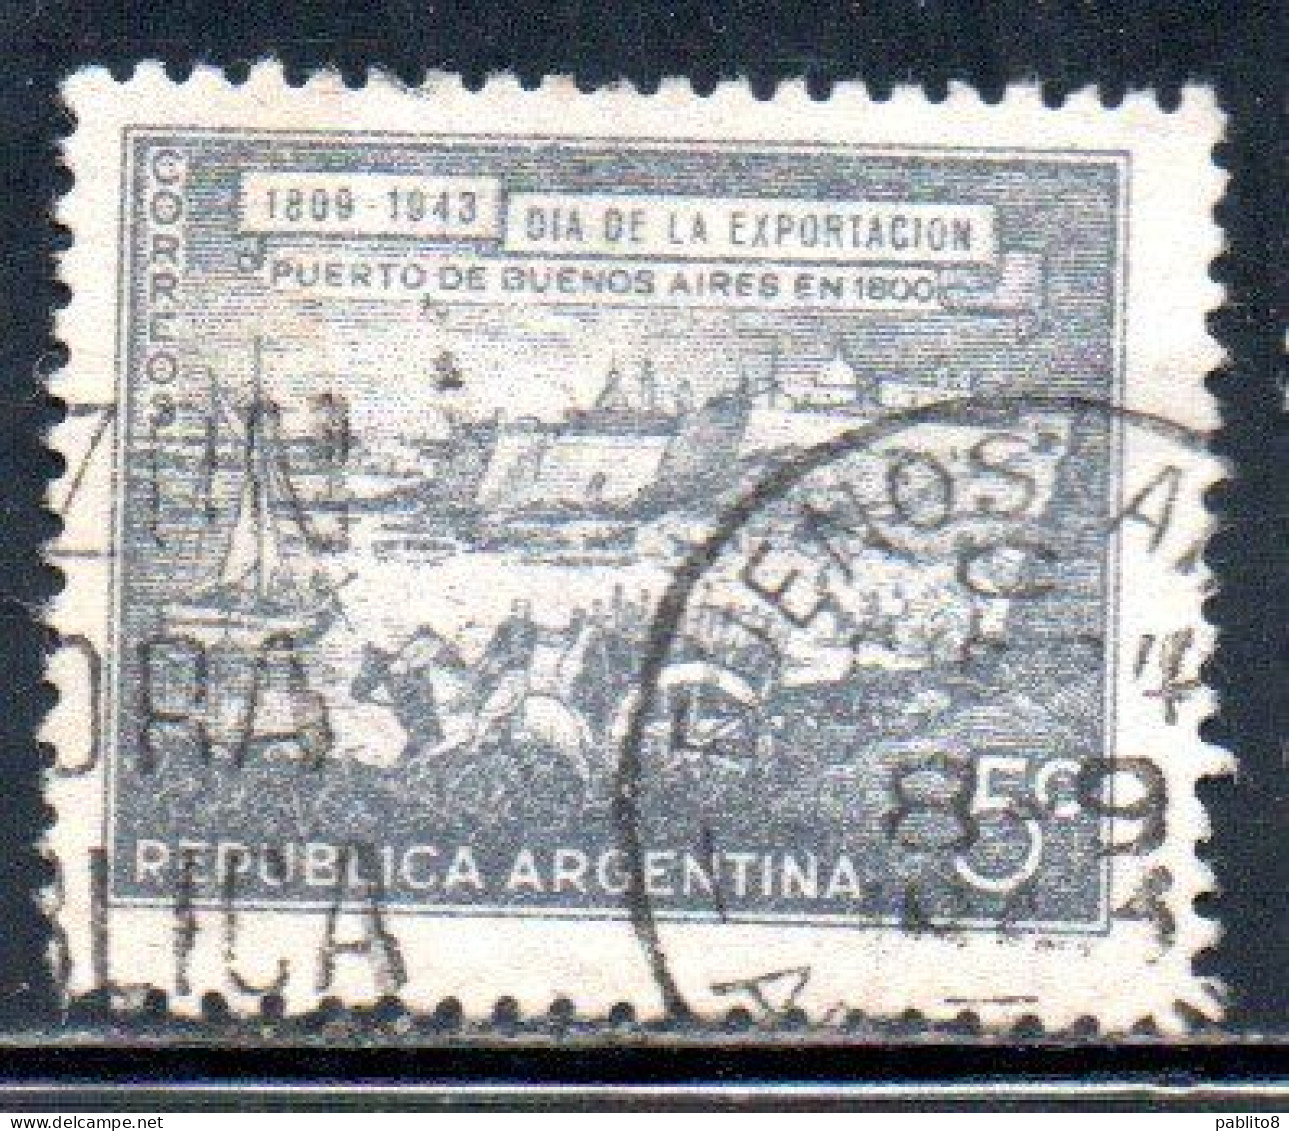 ARGENTINA 1943 DAY OF EXPORTS PORT OF BUENOS AIRES IN 1800  5c USED USADO OBLITERE' - Gebraucht